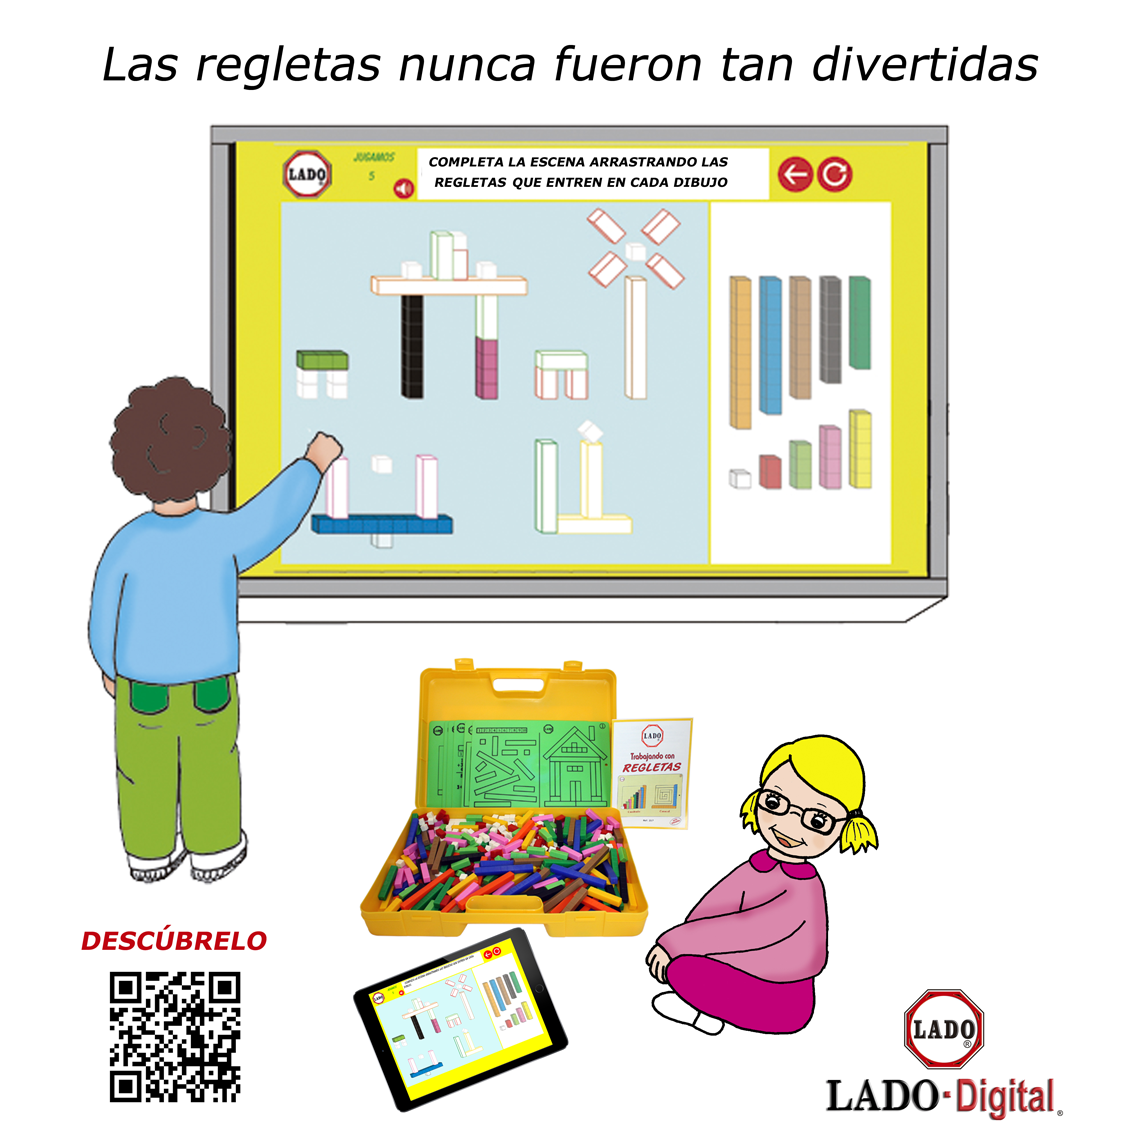 LADO Strips with Full Digital Method (Class Material)